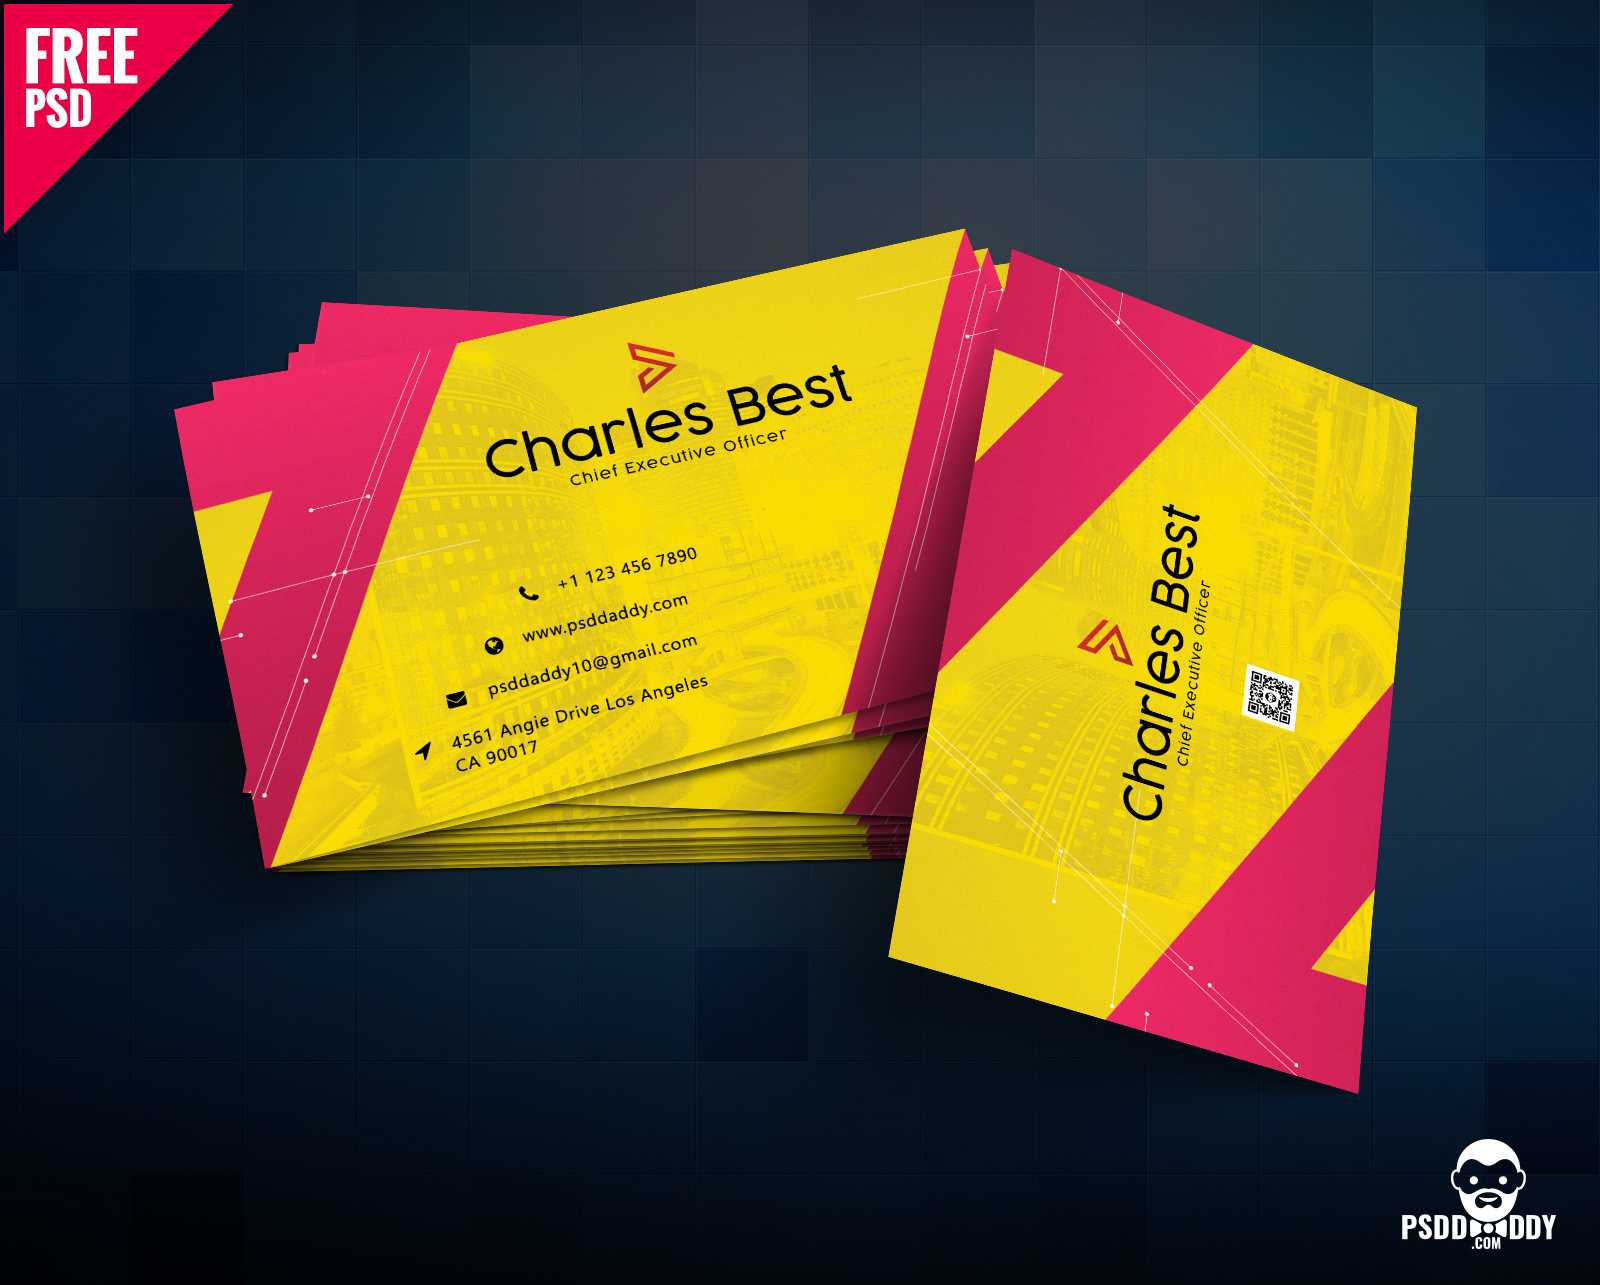 Download] Creative Business Card Free Psd | Psddaddy Pertaining To Visiting Card Psd Template